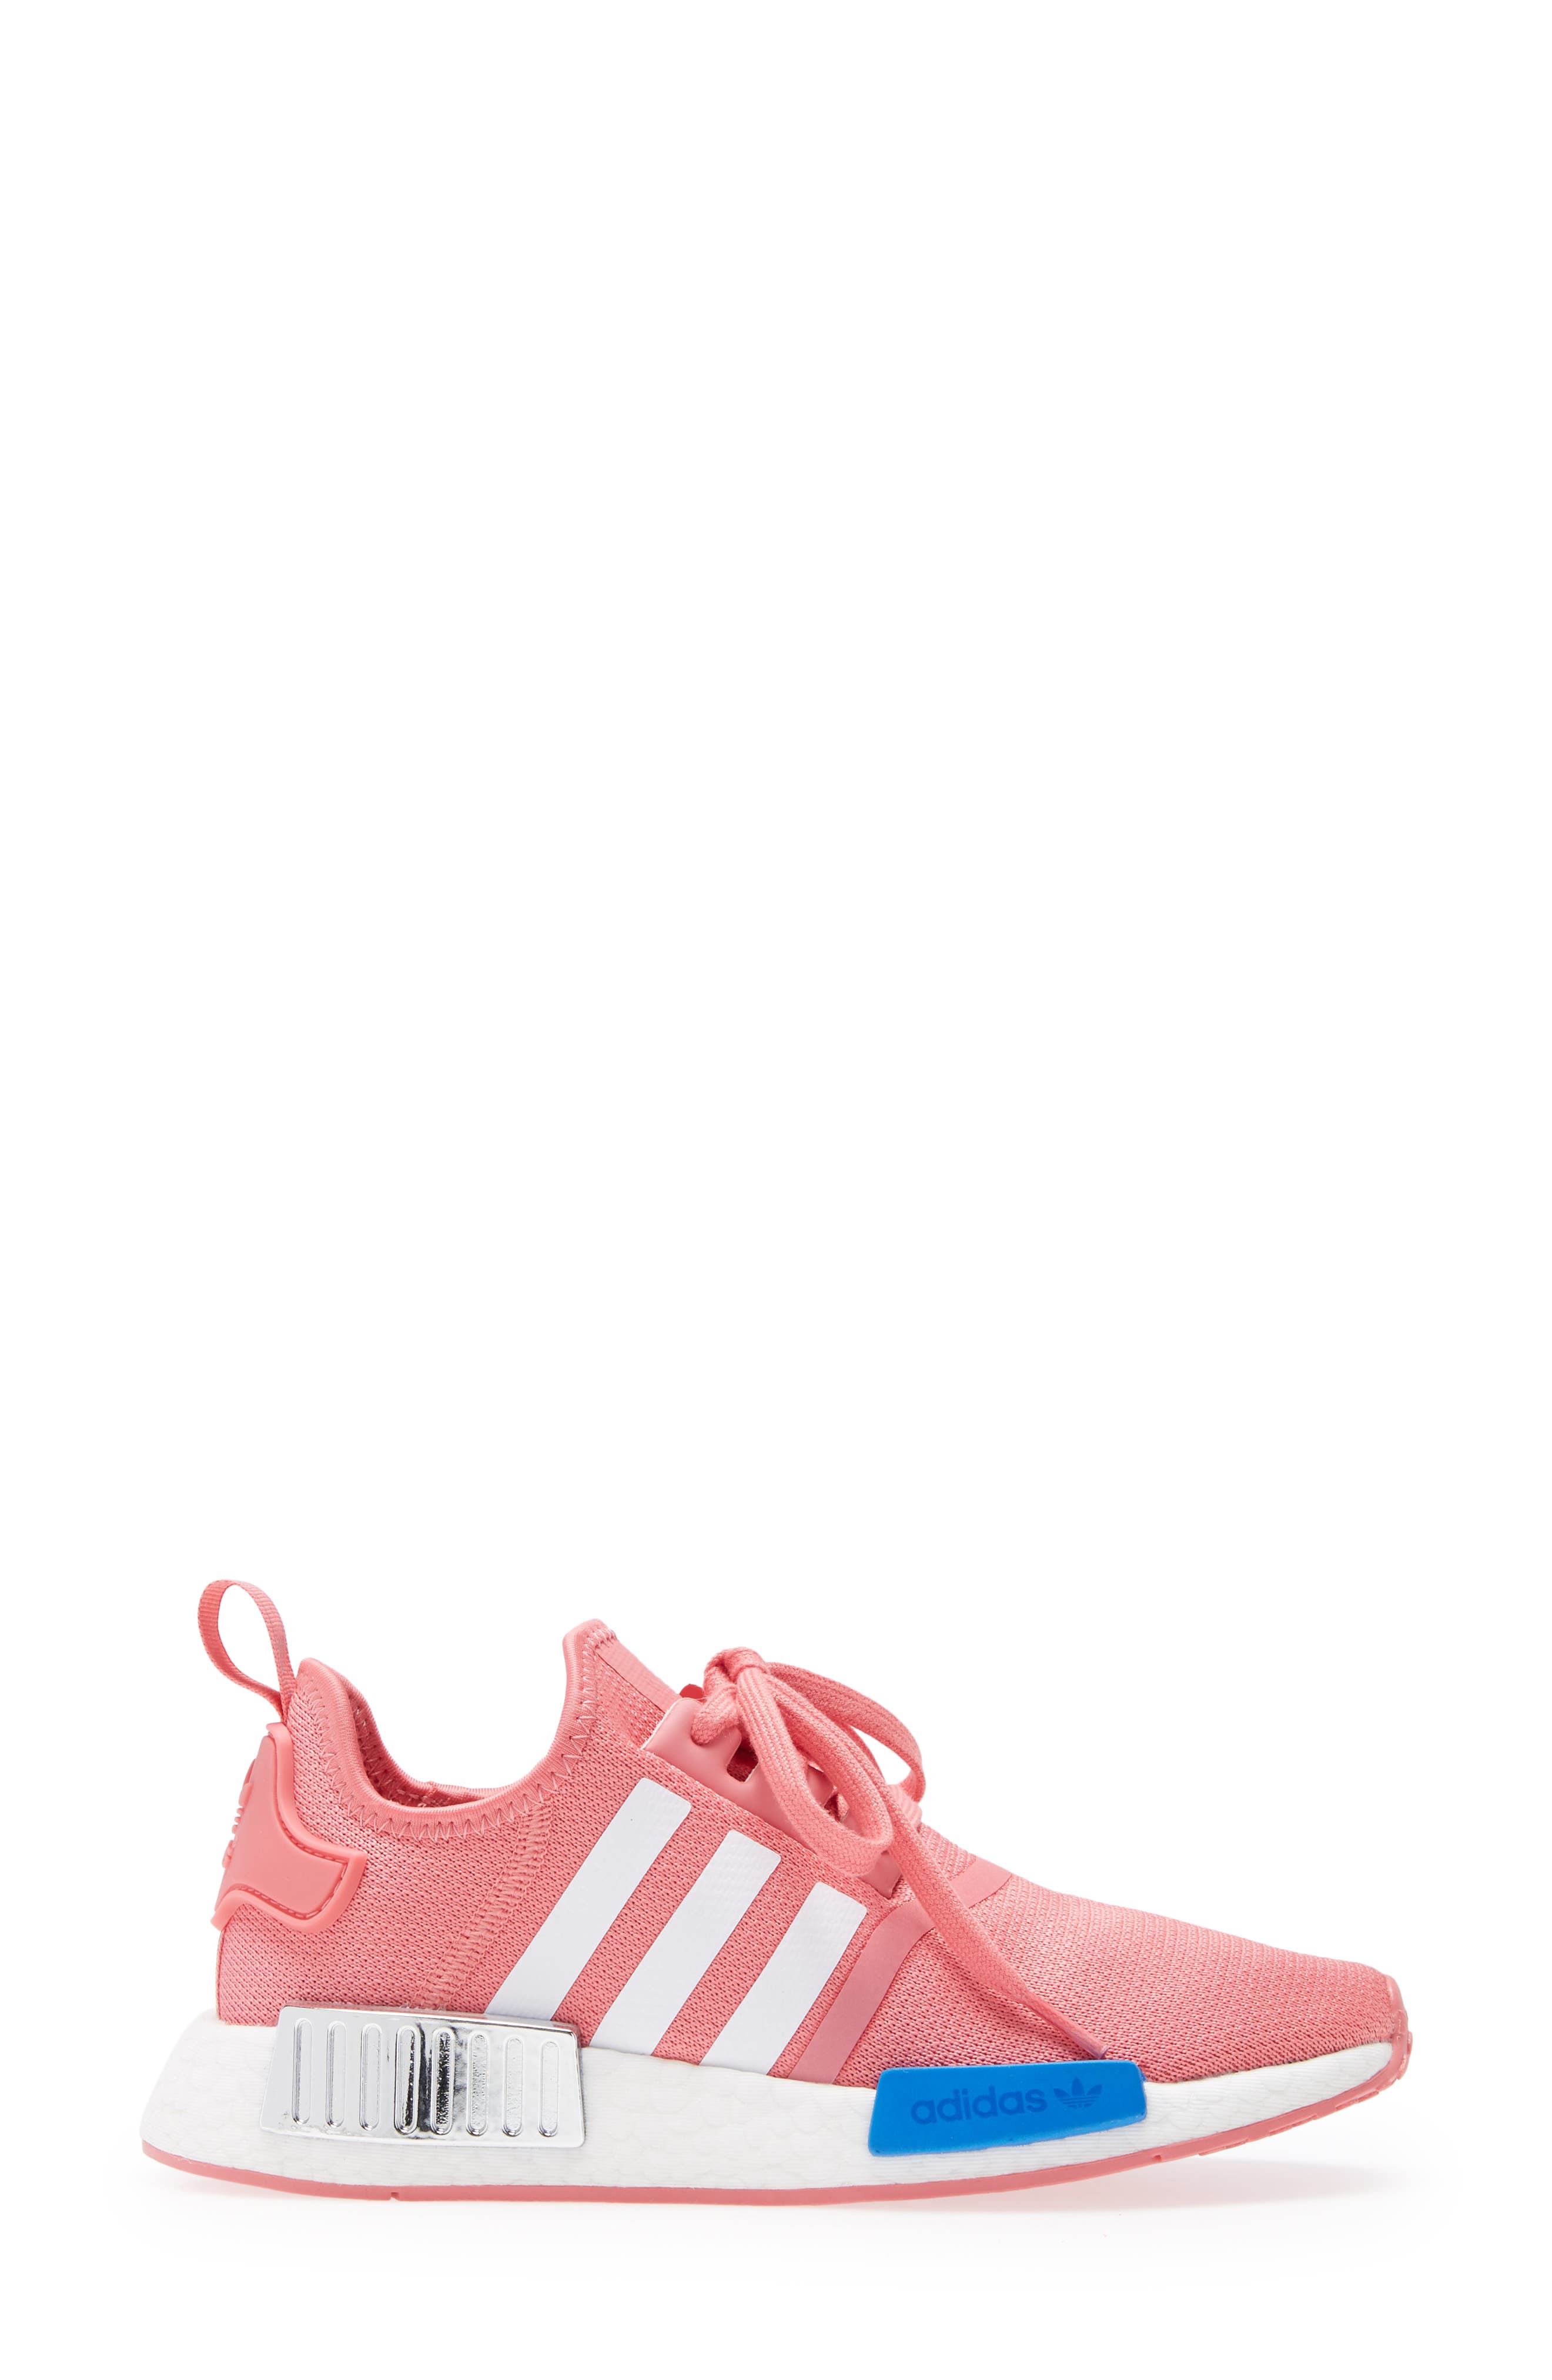 adidas nmd r1 womens pink and white